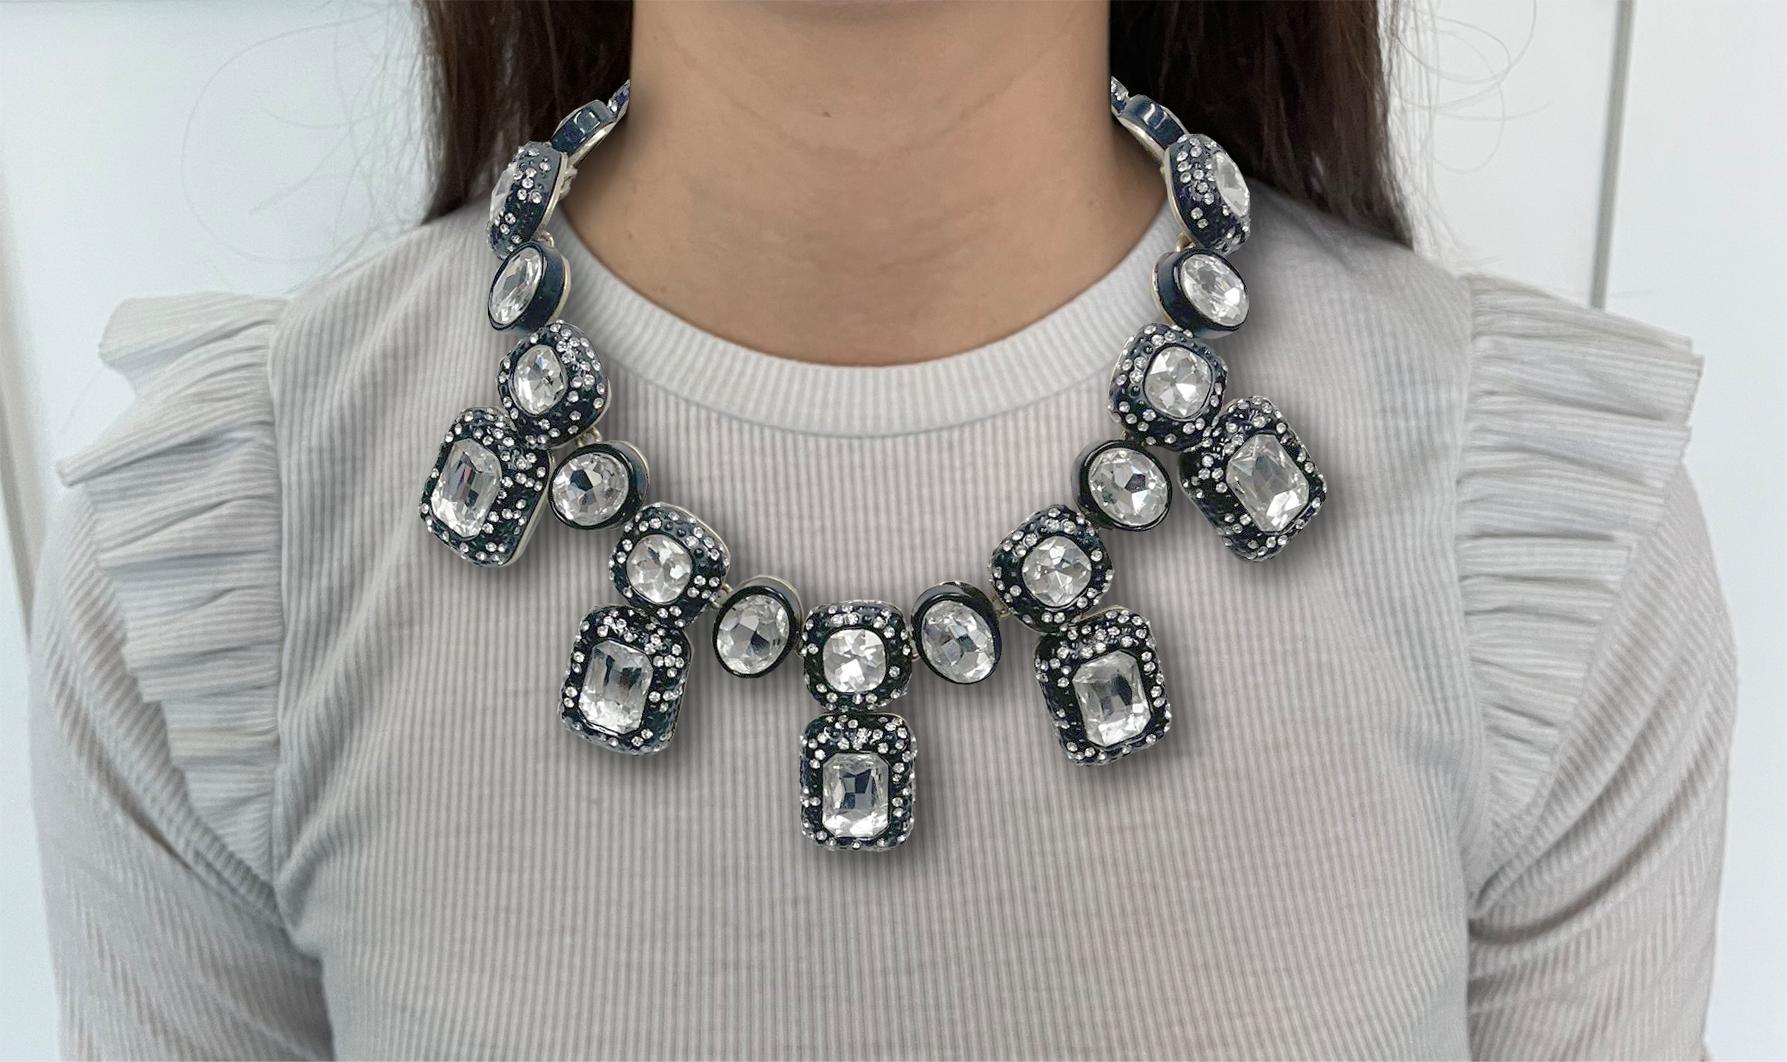 Designer statement Crystal Necklace. Black Japanned mounting featuring thick square beaded metal Links alternating with oval bezel links. Square links set with large cushion cut clear crystals and small black and clear crystals dotted around the